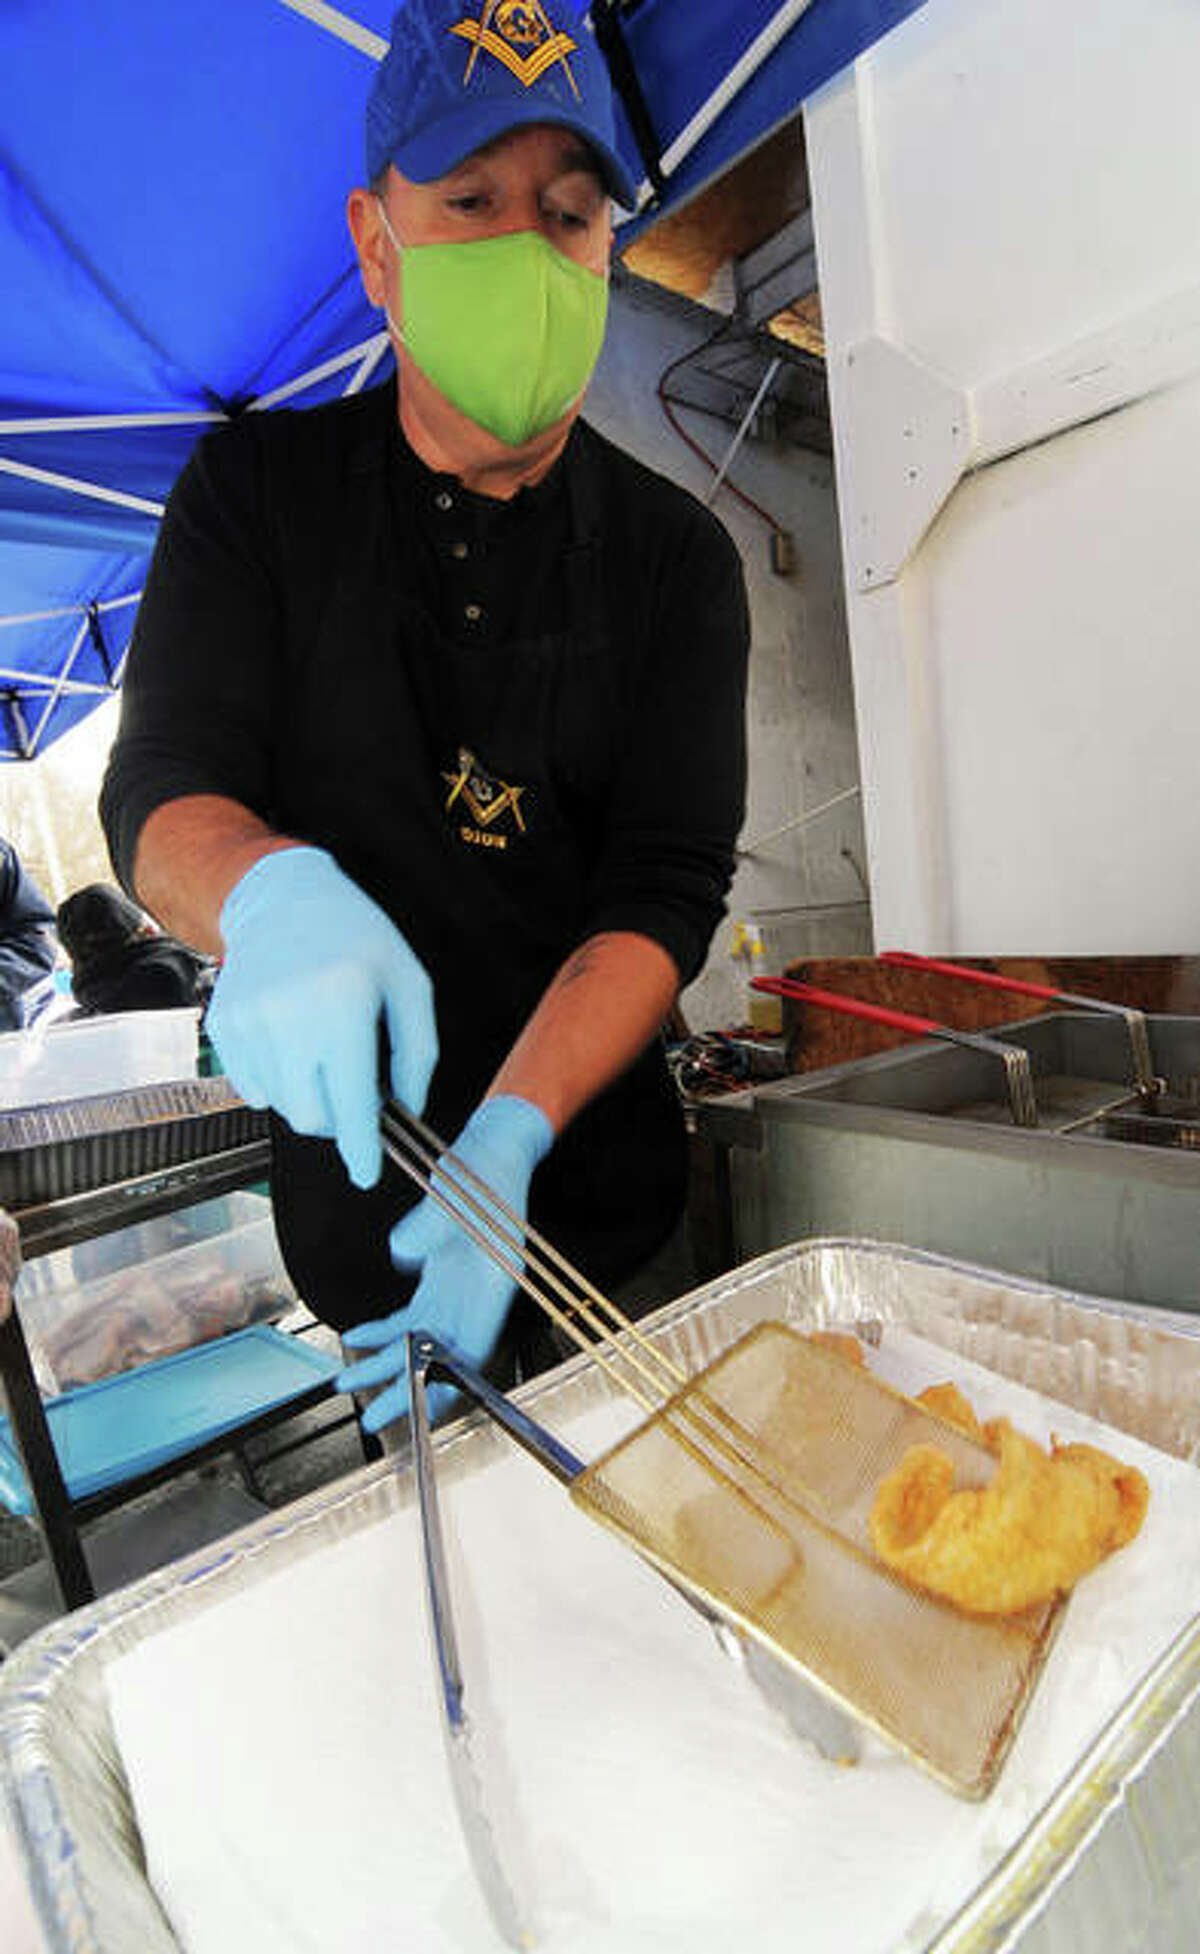 Dion Roe removes a hot piece of fish from the fryer during Saturday’s Bethalto Masonic Lodge Fish Fry.